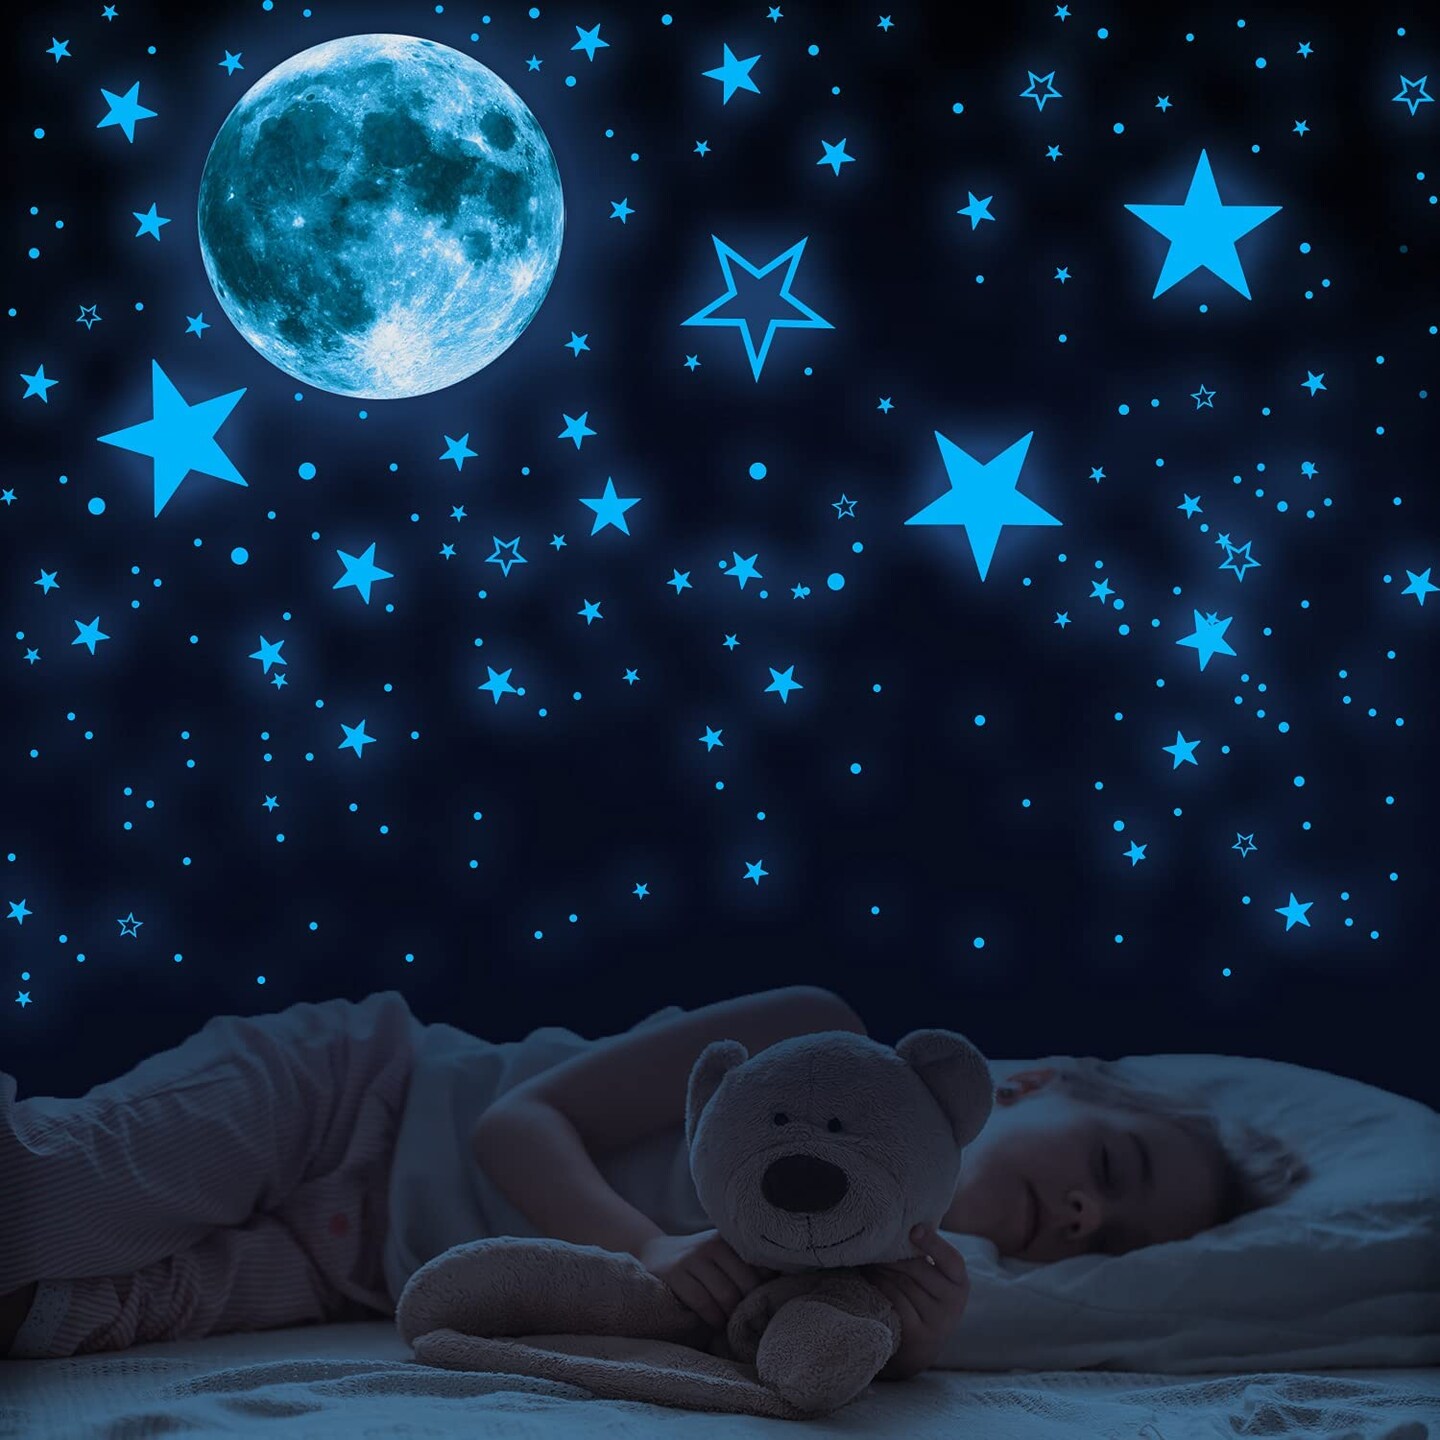 VUDECO 1109 Piece Glow In The Dark Stars and Moon Sticker for Kids Room Decor